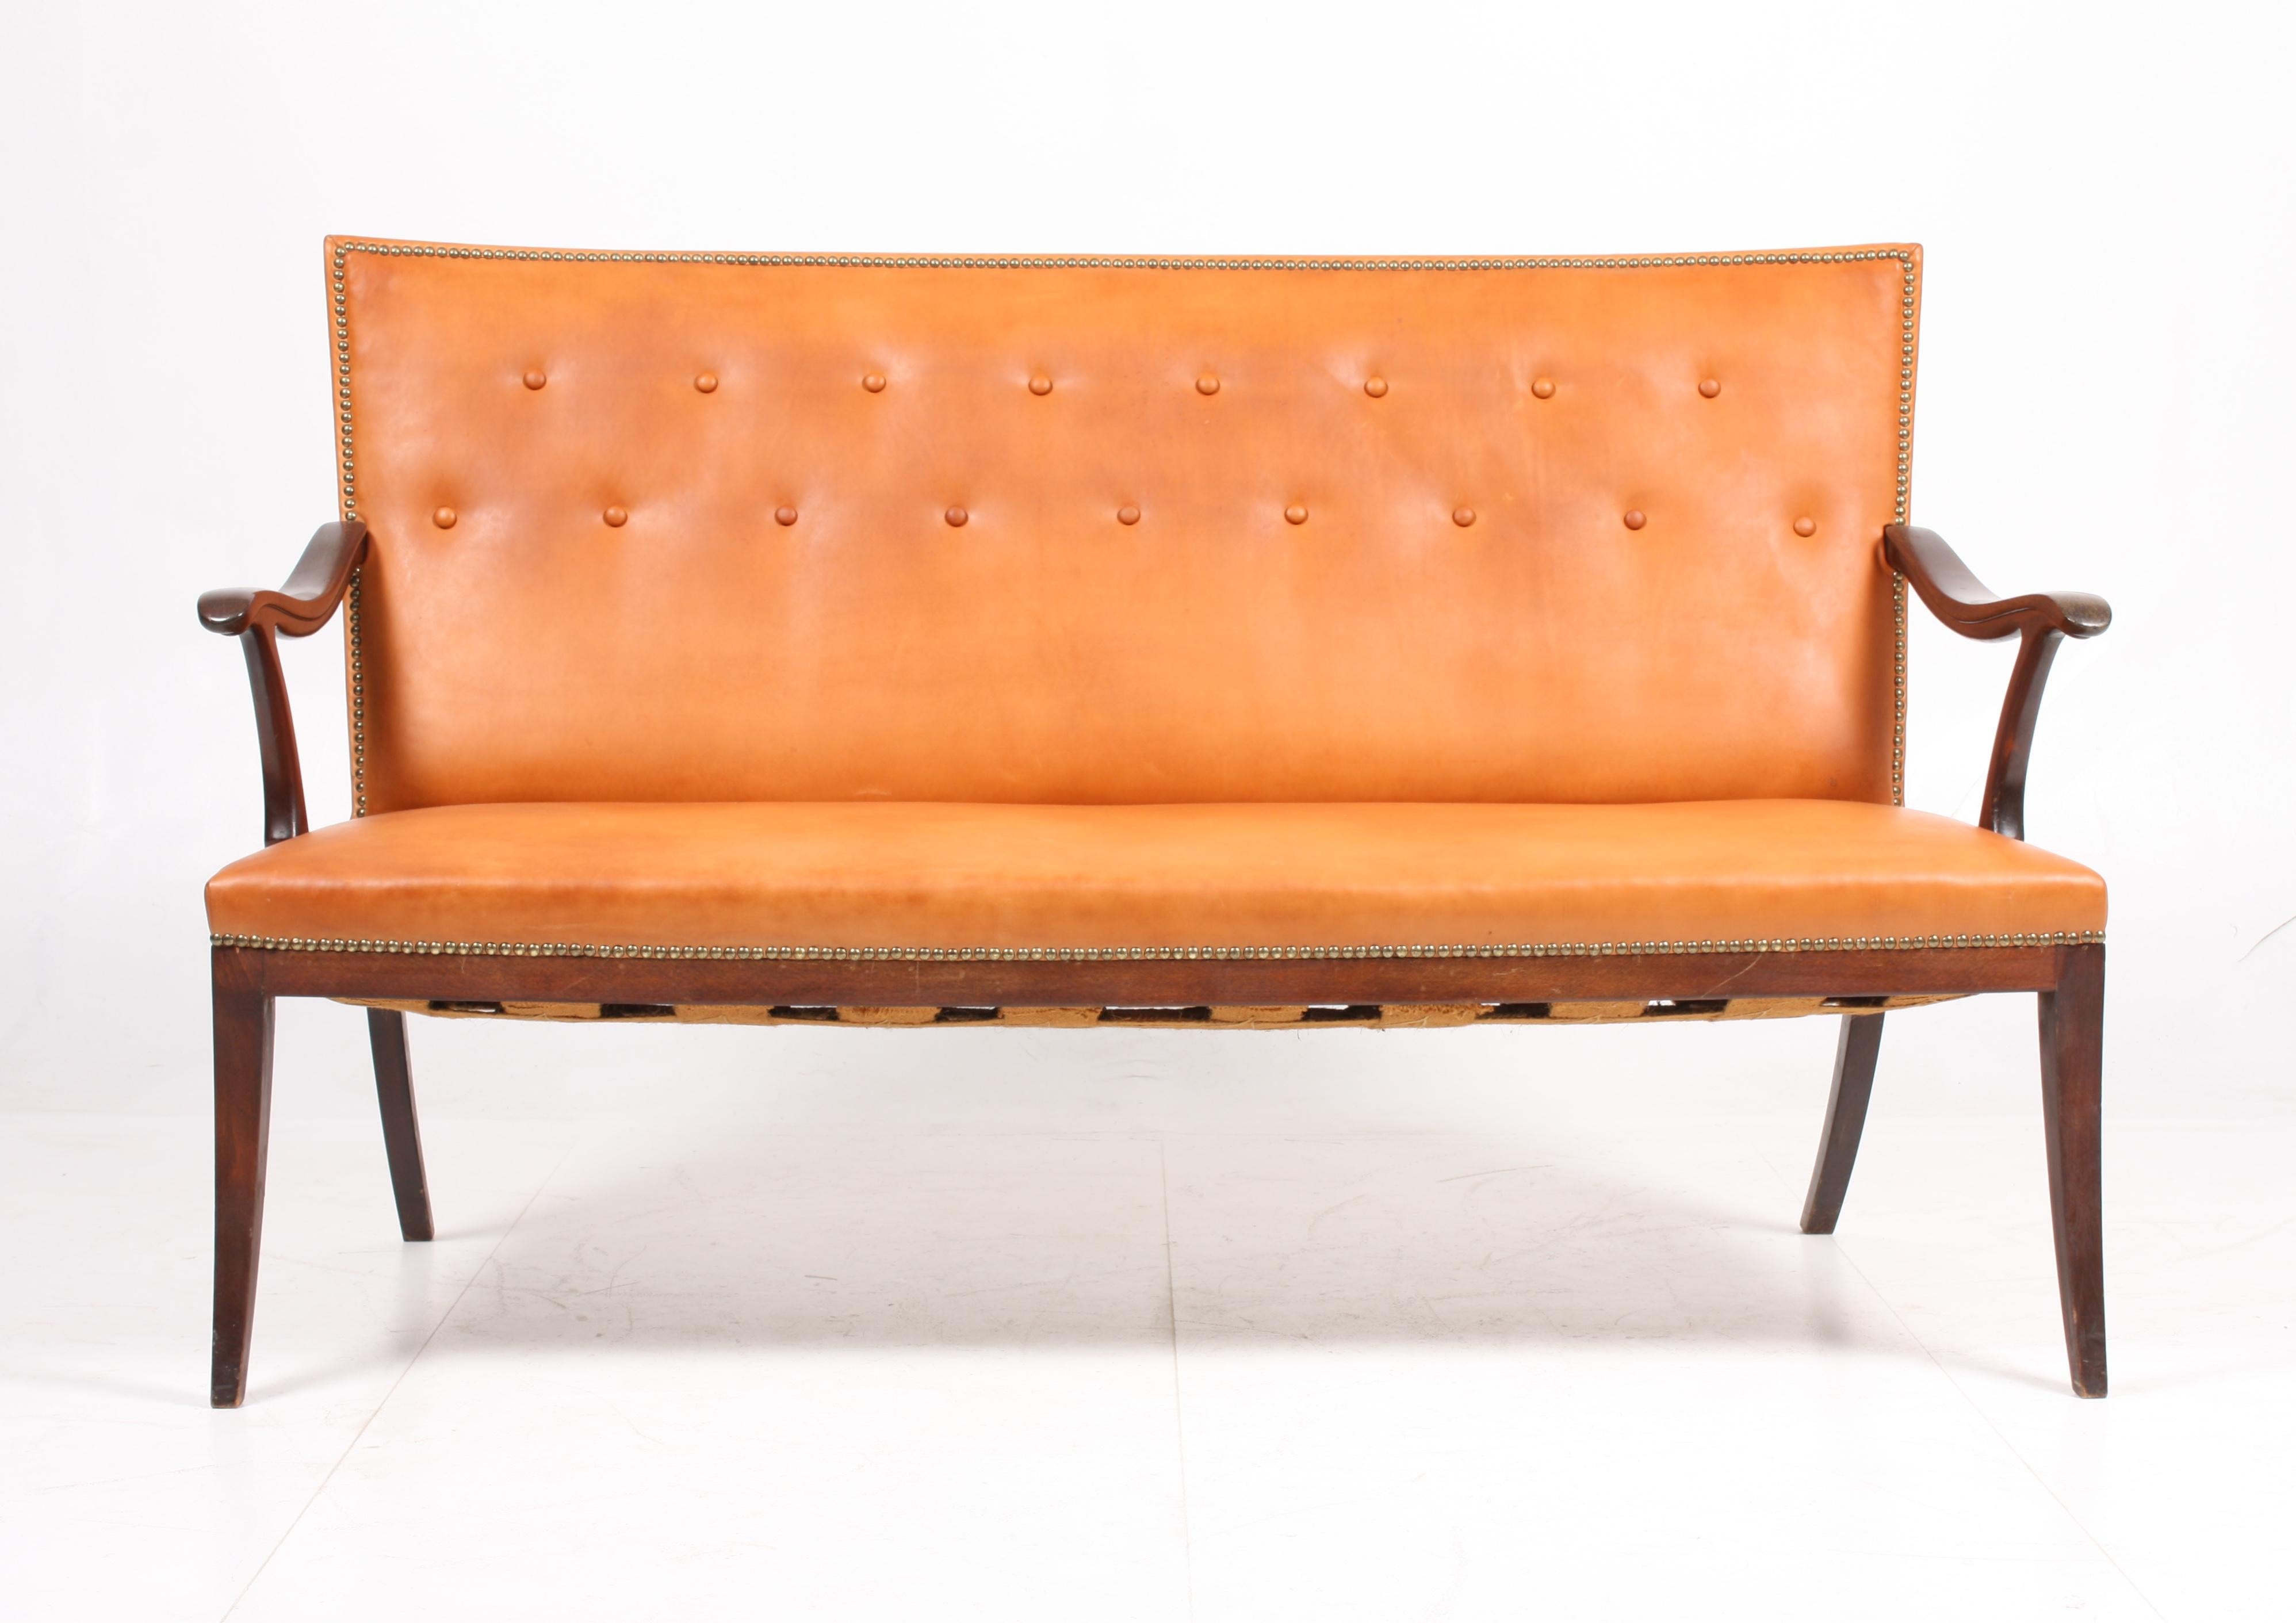 Sofa in mahogany finished beech and patinated natural leather by Frits Henningsen cabinetmakers Copenhagen. Designed in the 1940s. Great condition.